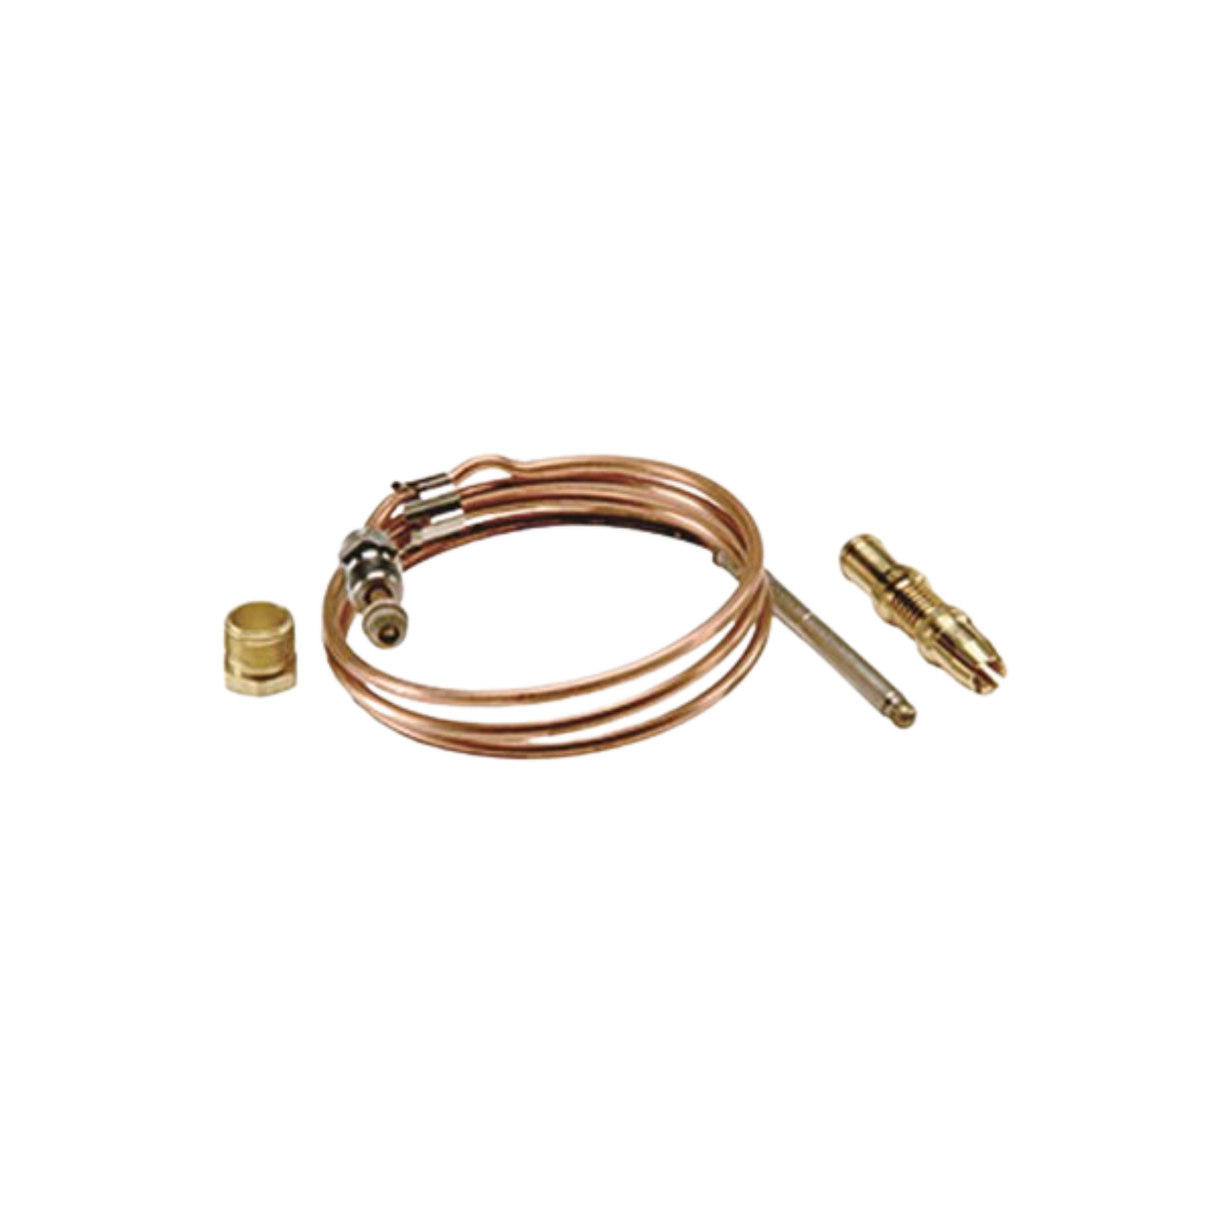 Robertshaw 1980-018 18" Snap Fit Thermocouple